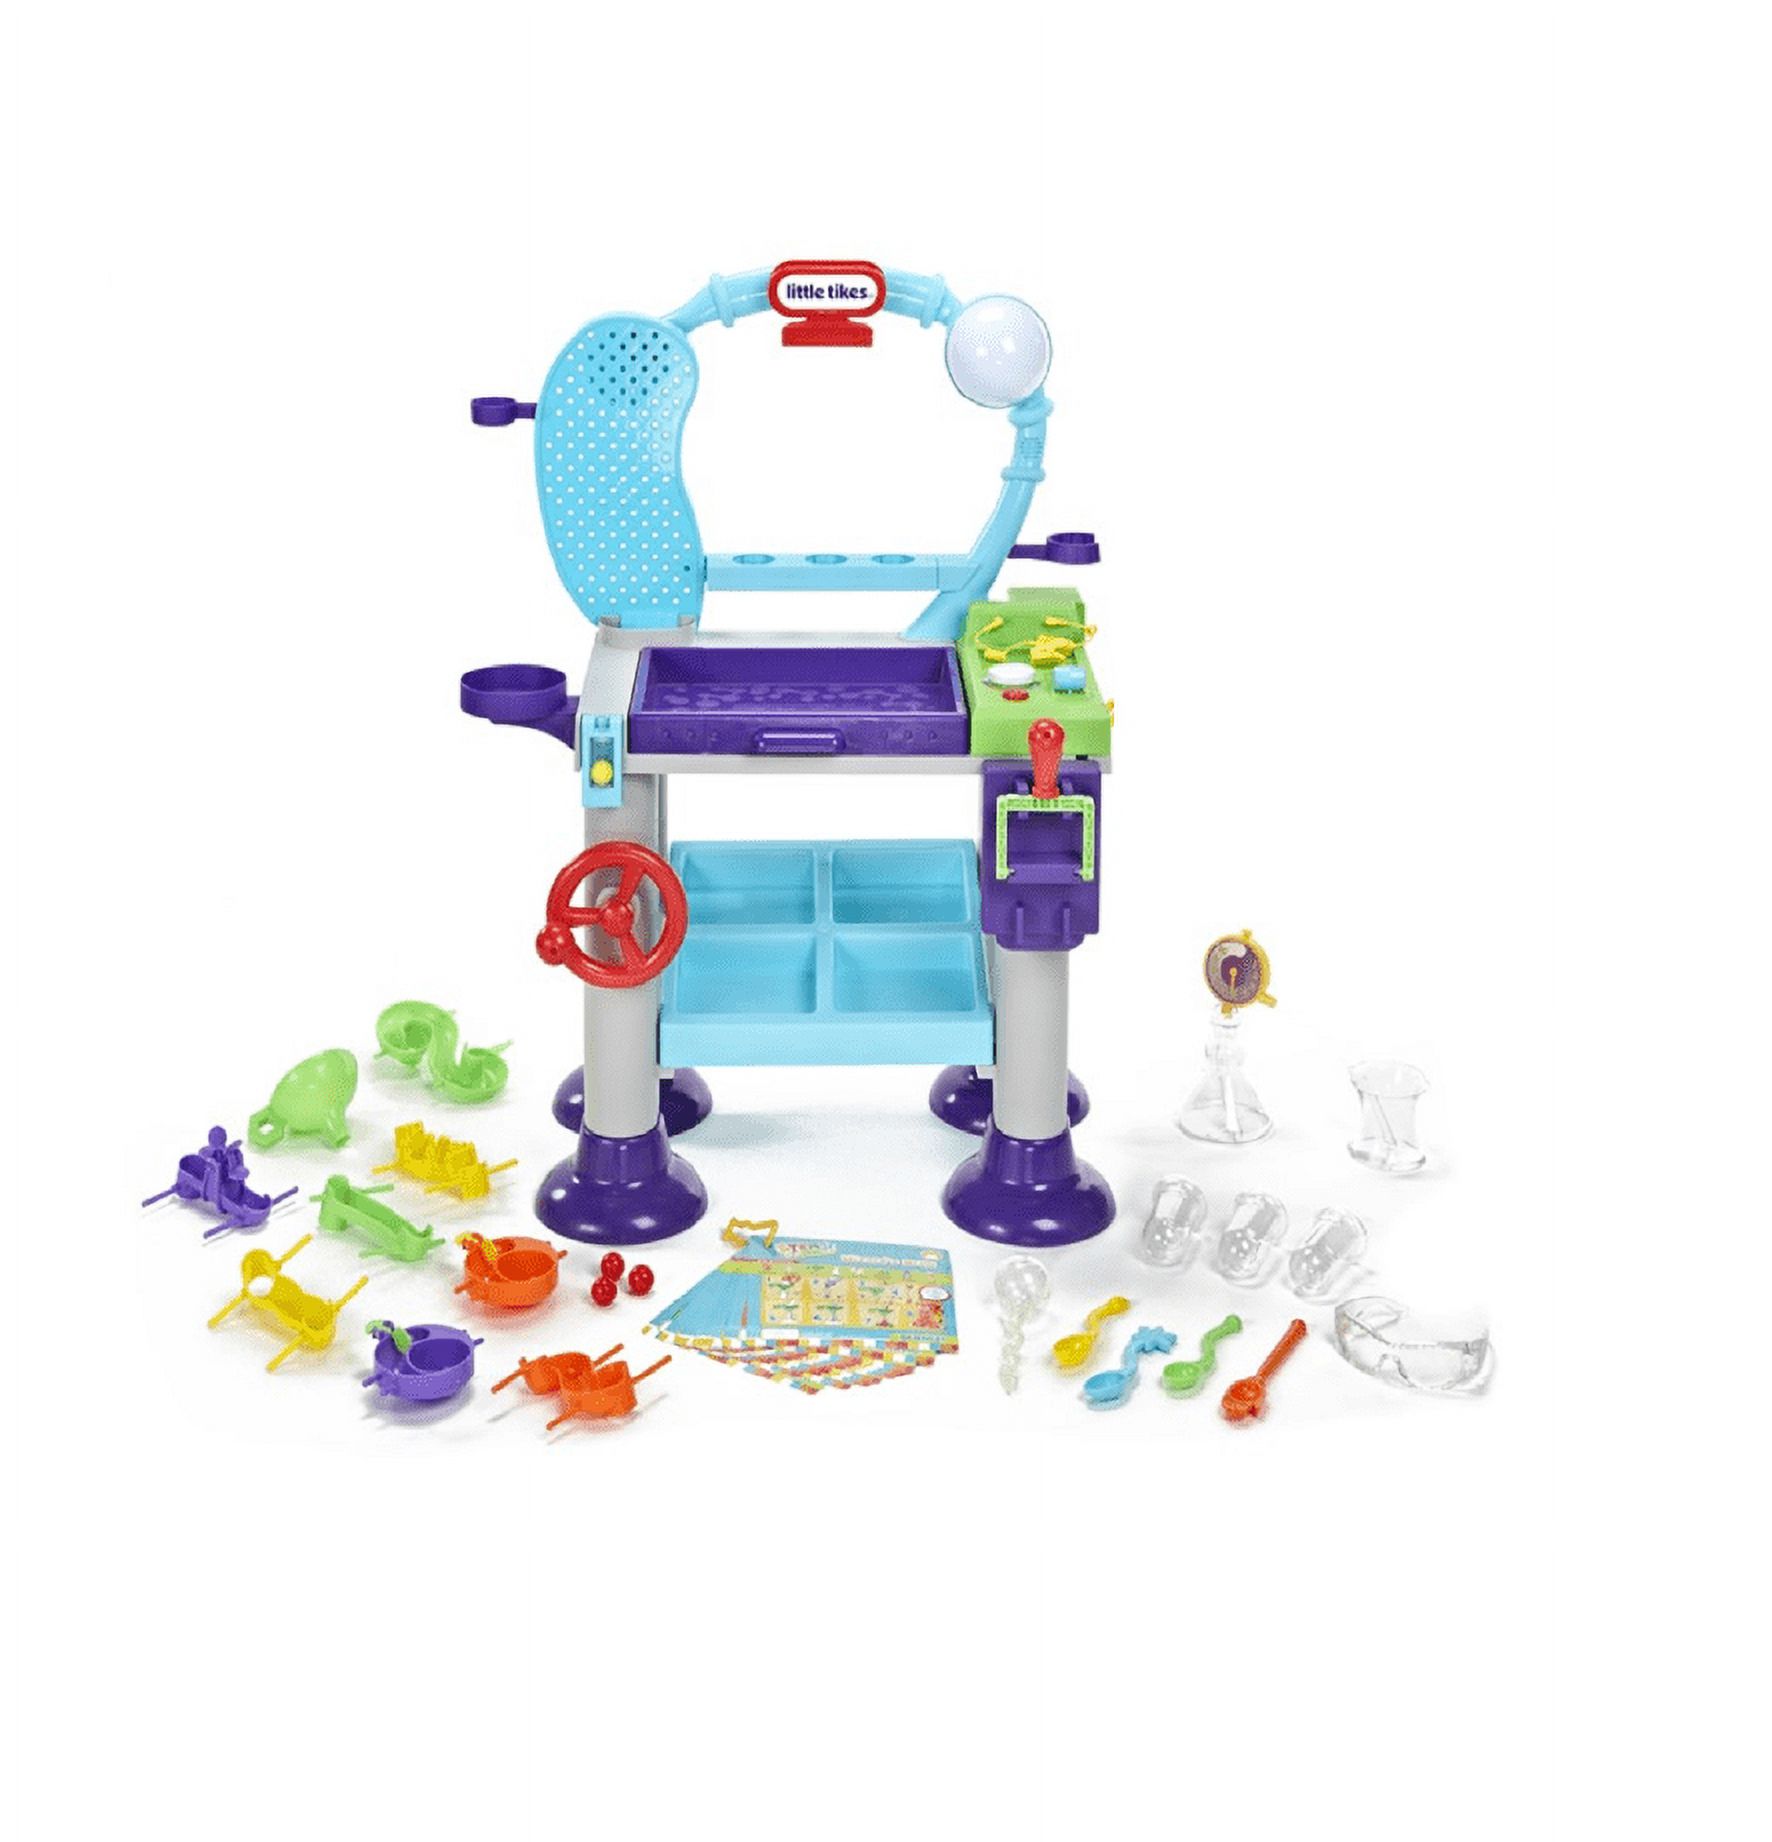 Little Tikes STEM Jr. Wonder Lab Toy with Experiments for Kids - image 1 of 8